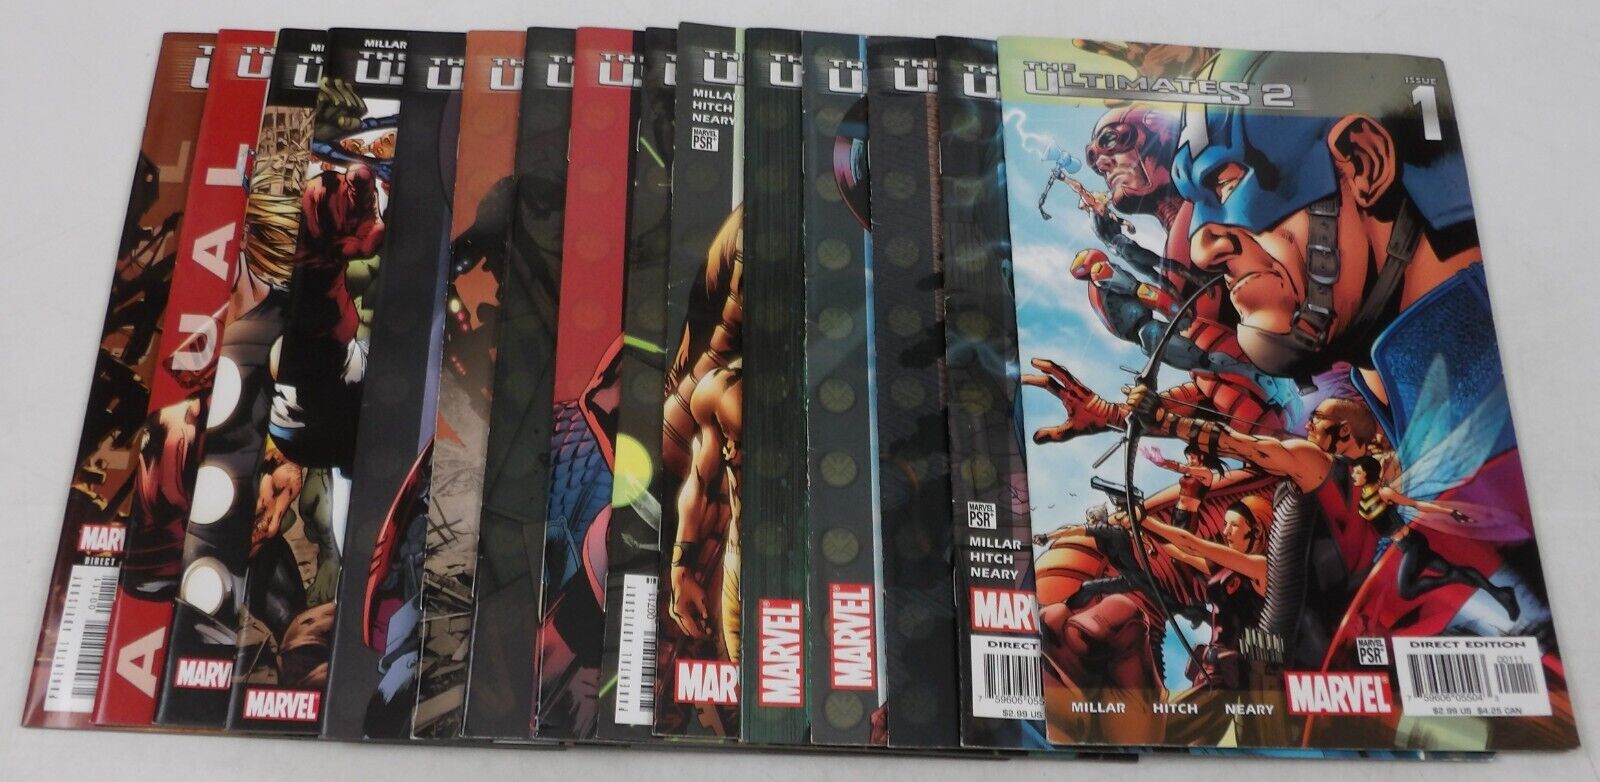 the Ultimates 2 #1-13 VF complete series + Annual 1-2 Mark Millar Avengers